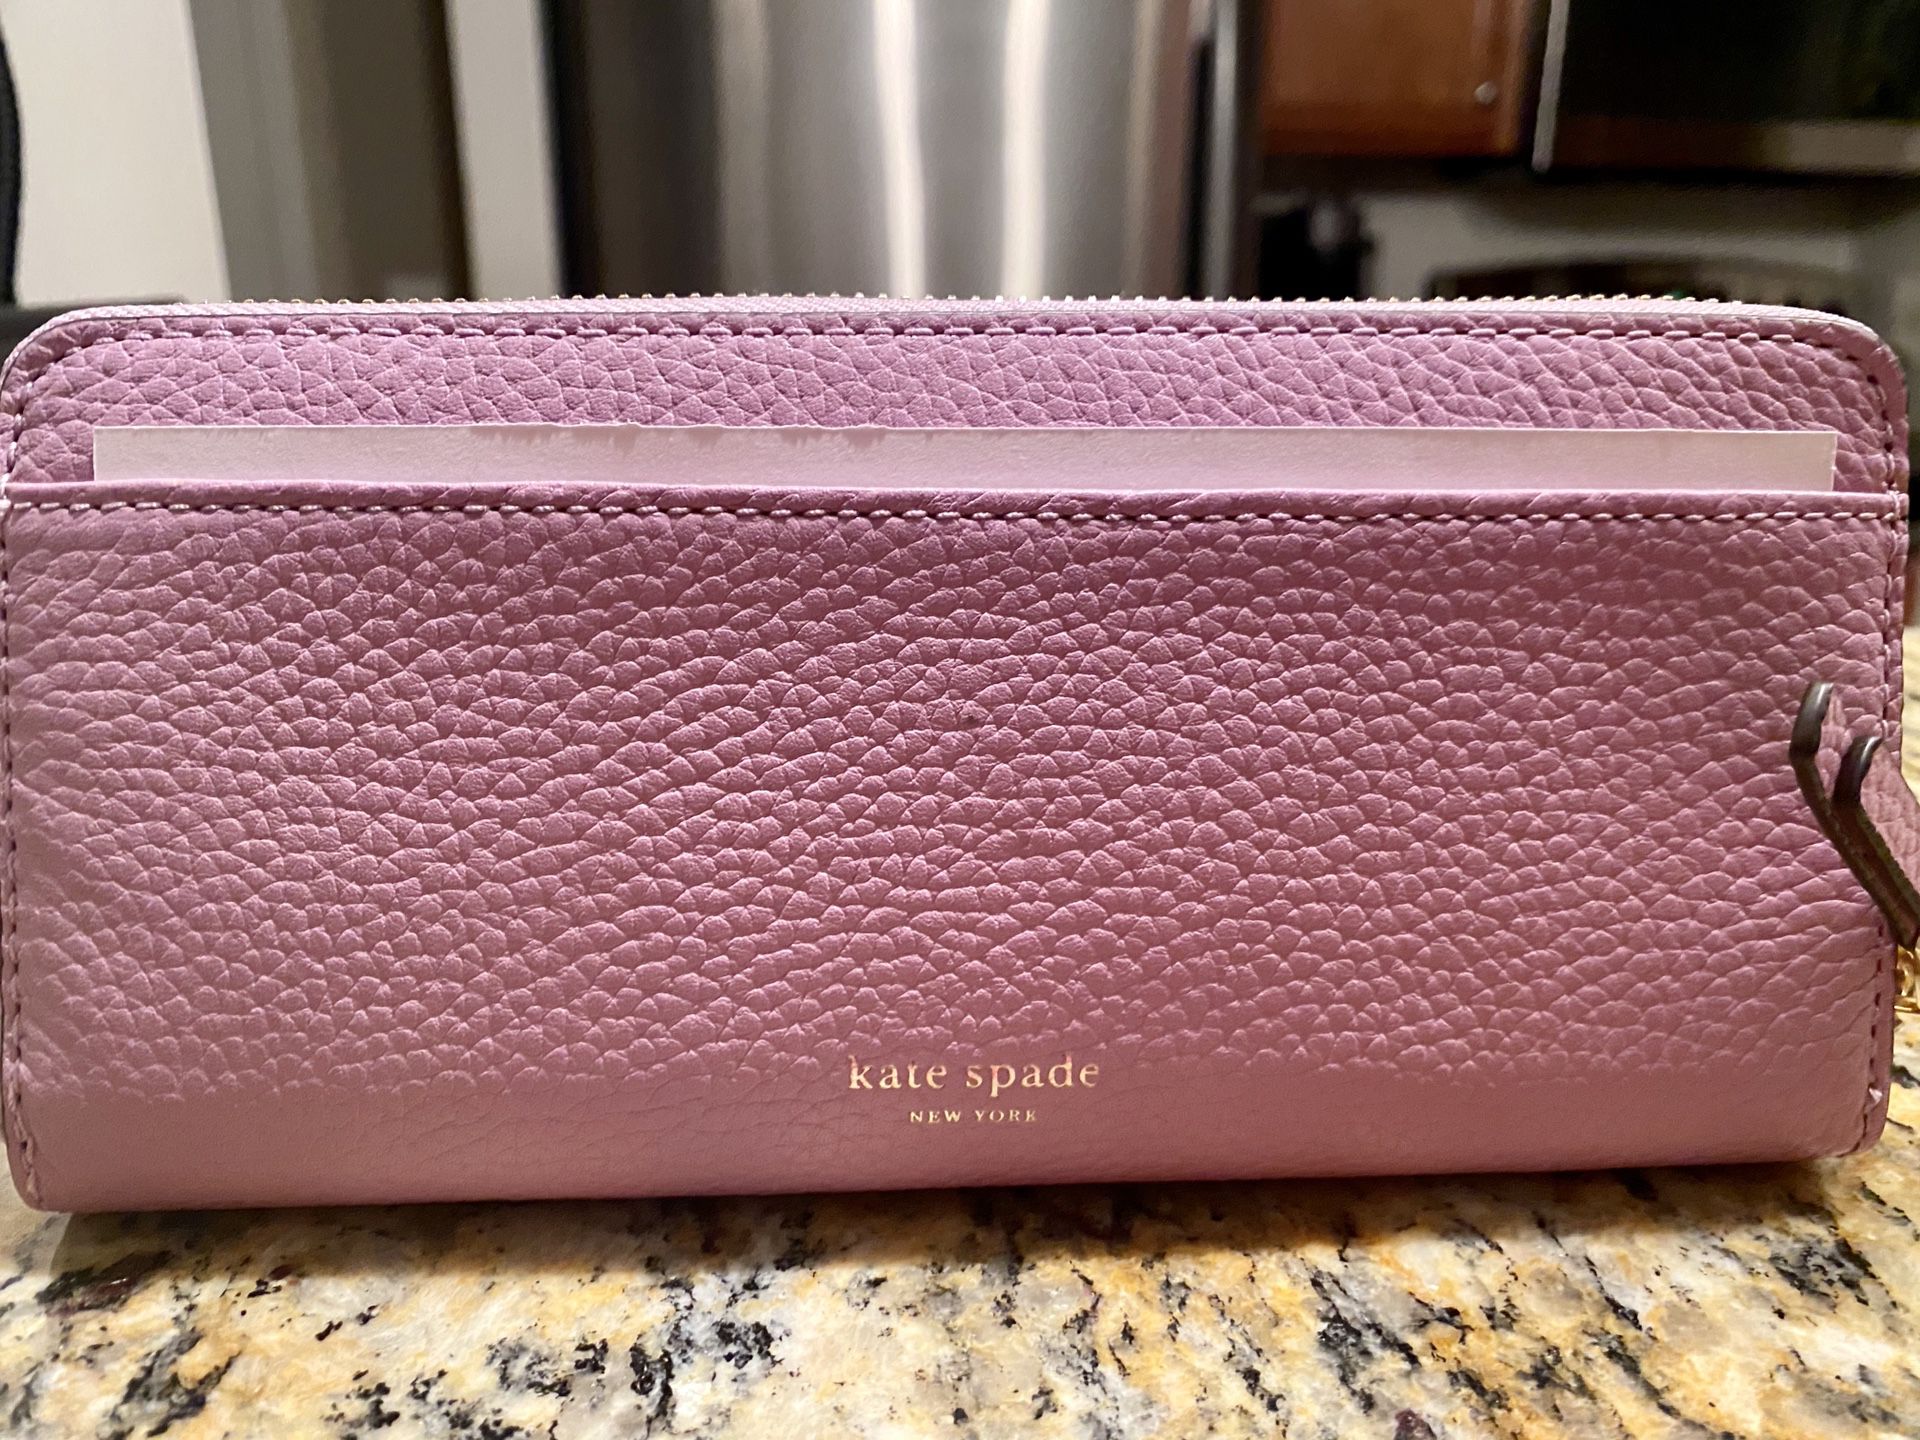 Kate Spade wallet , still brand new with Lilac color leather .